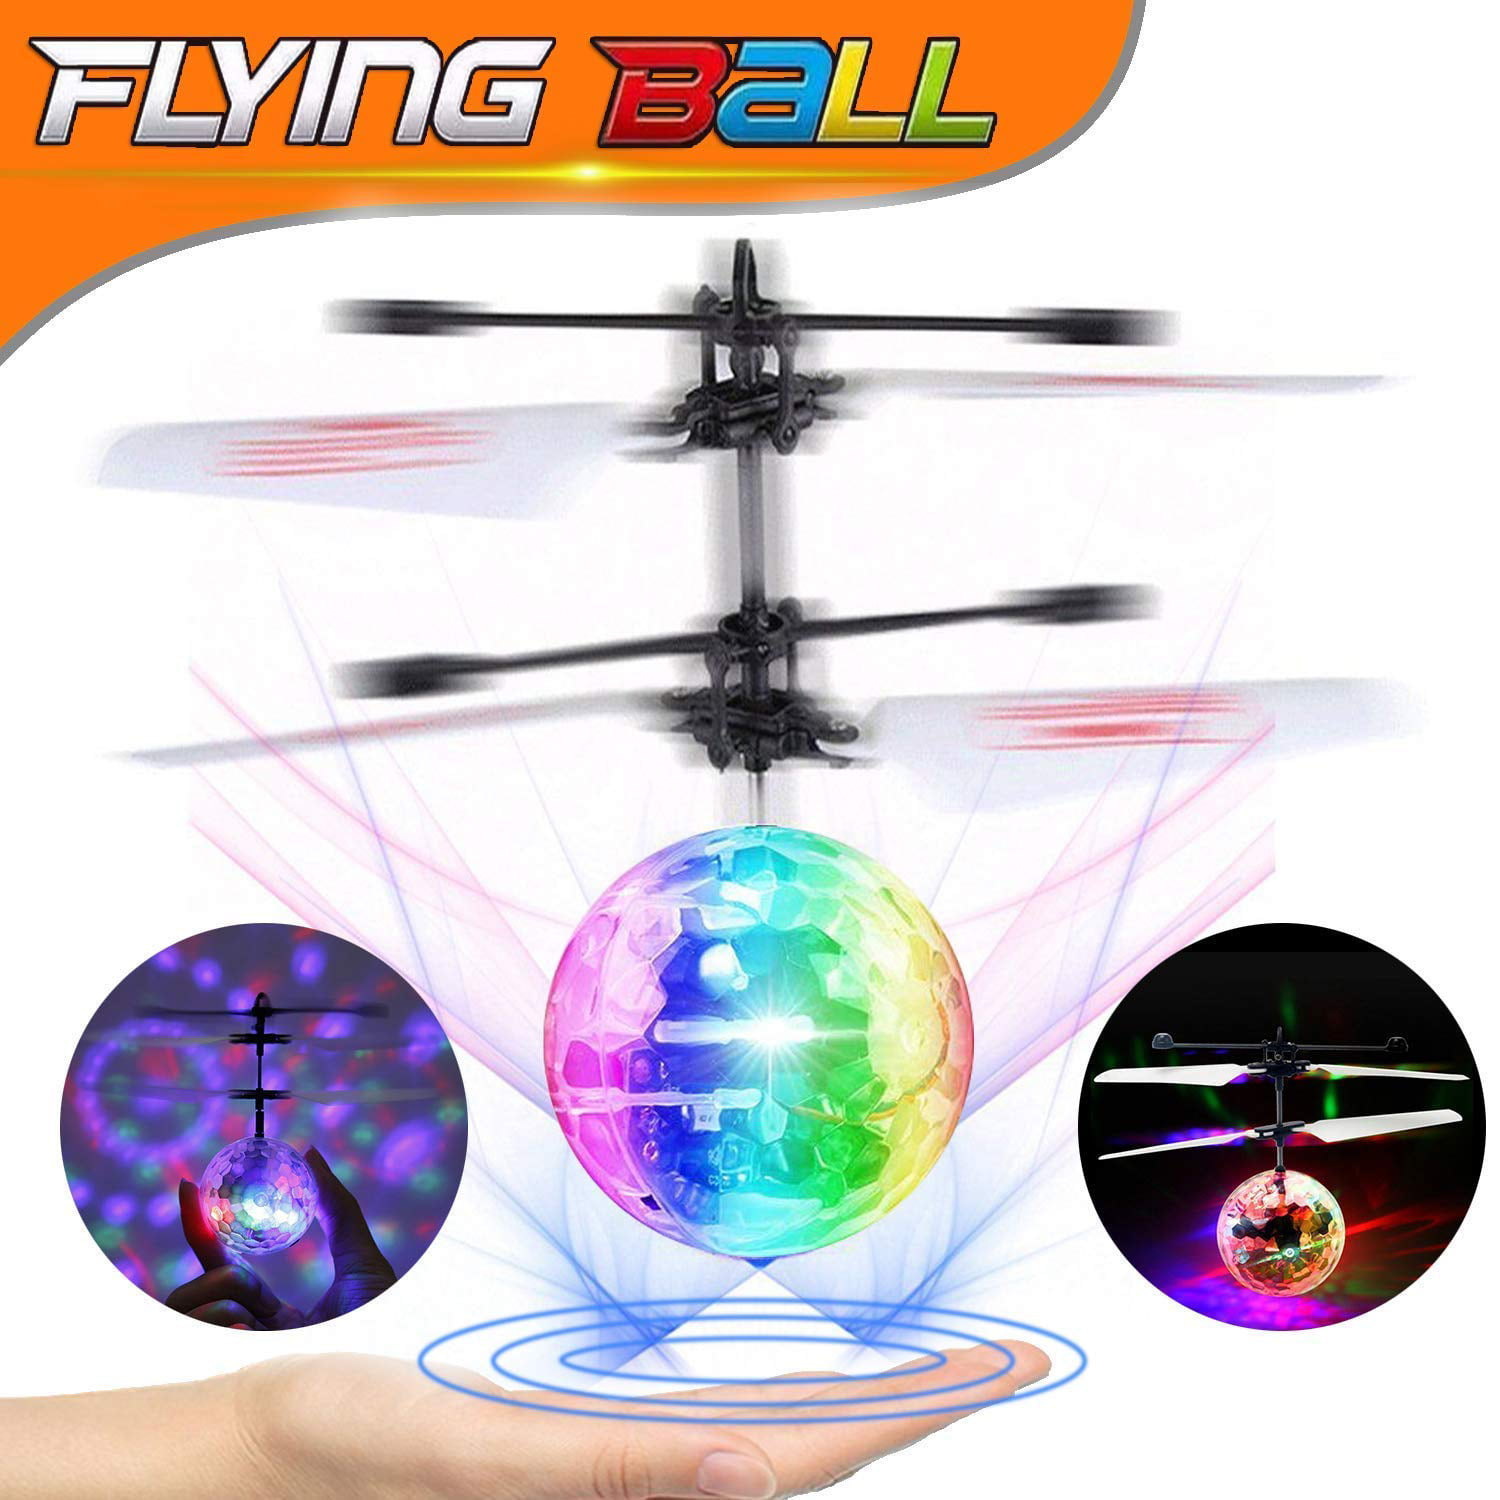 Betheaces Flying Ball Boys Toys Infrared Induction Helicopter Drone with Colorful Shinning LED Light and Remote Controller for Kids RC Flying Toy Gifts for Boys and Girls Indoor and Outdoor Games 